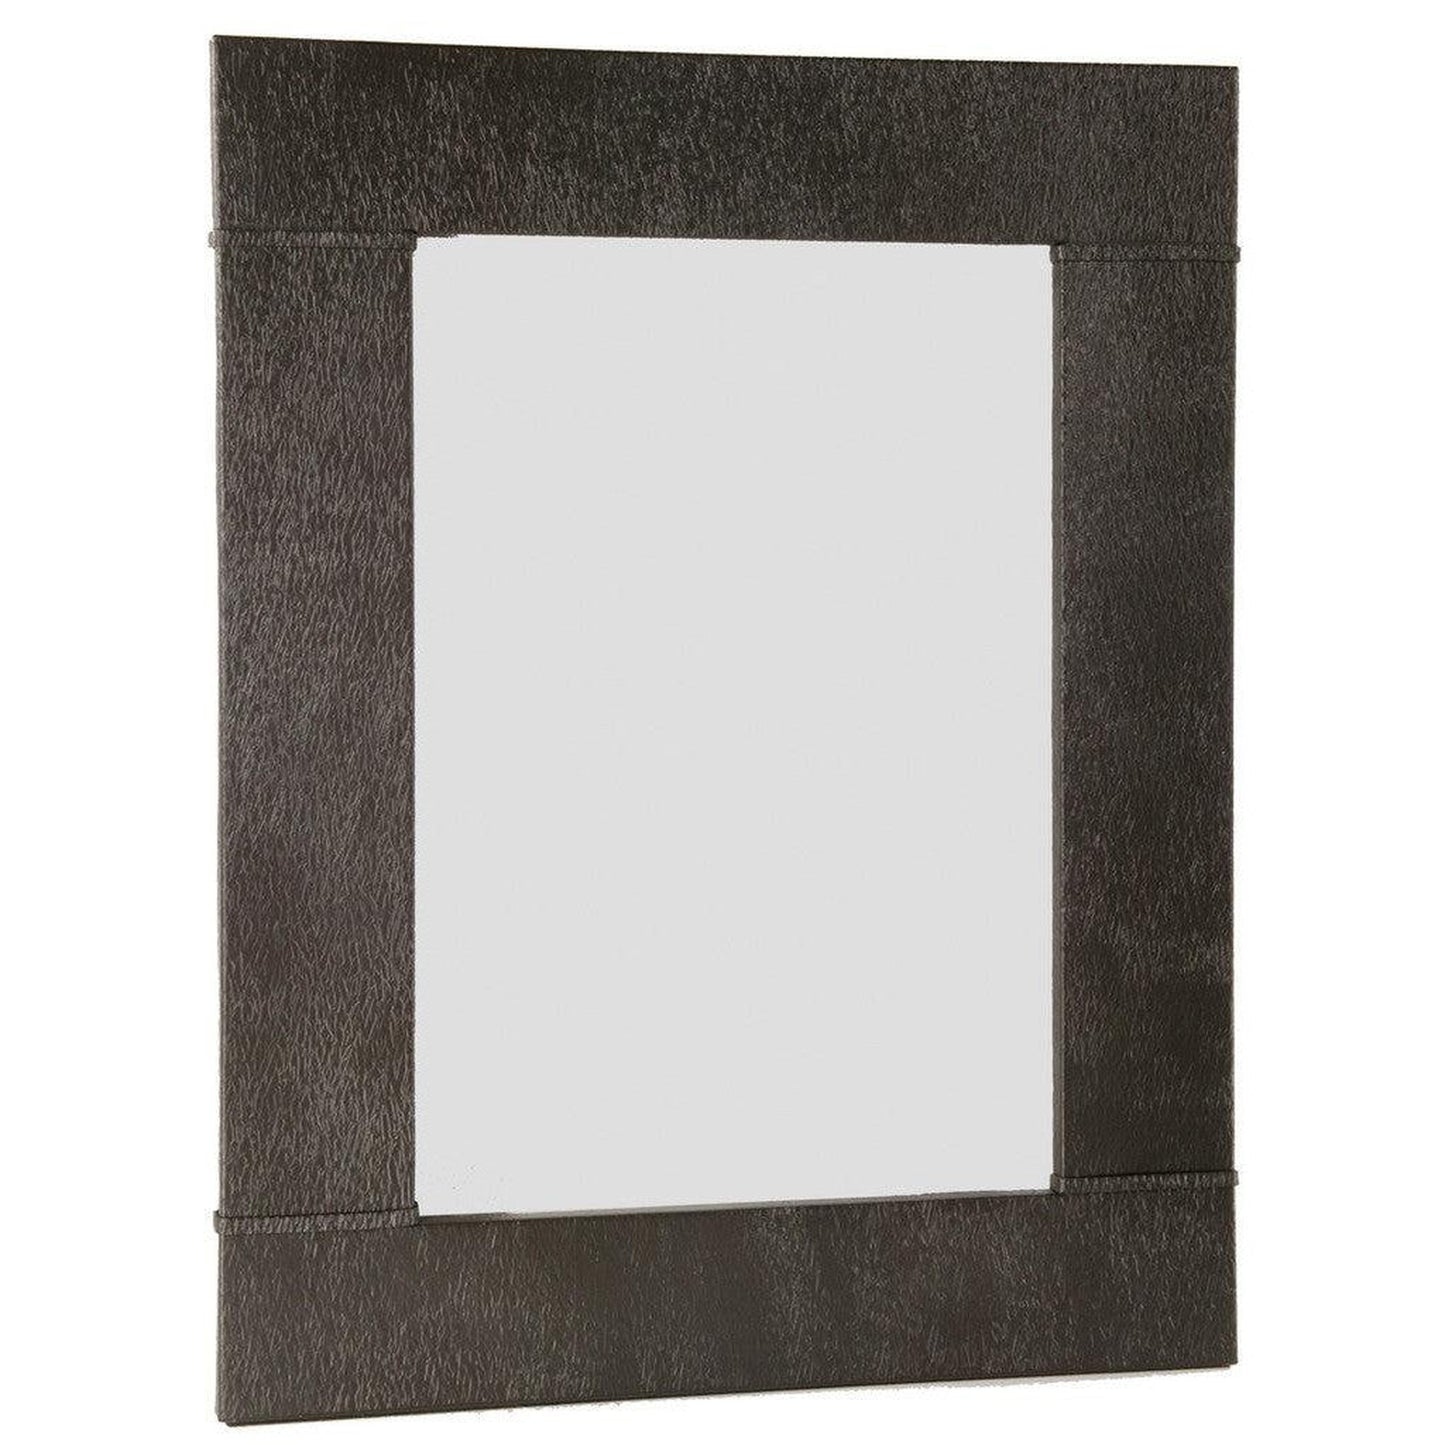 Stone County Ironworks Cedarvale 37" x 45" Large Natural Black Iron Wall Mirror With Copper Iron Accent